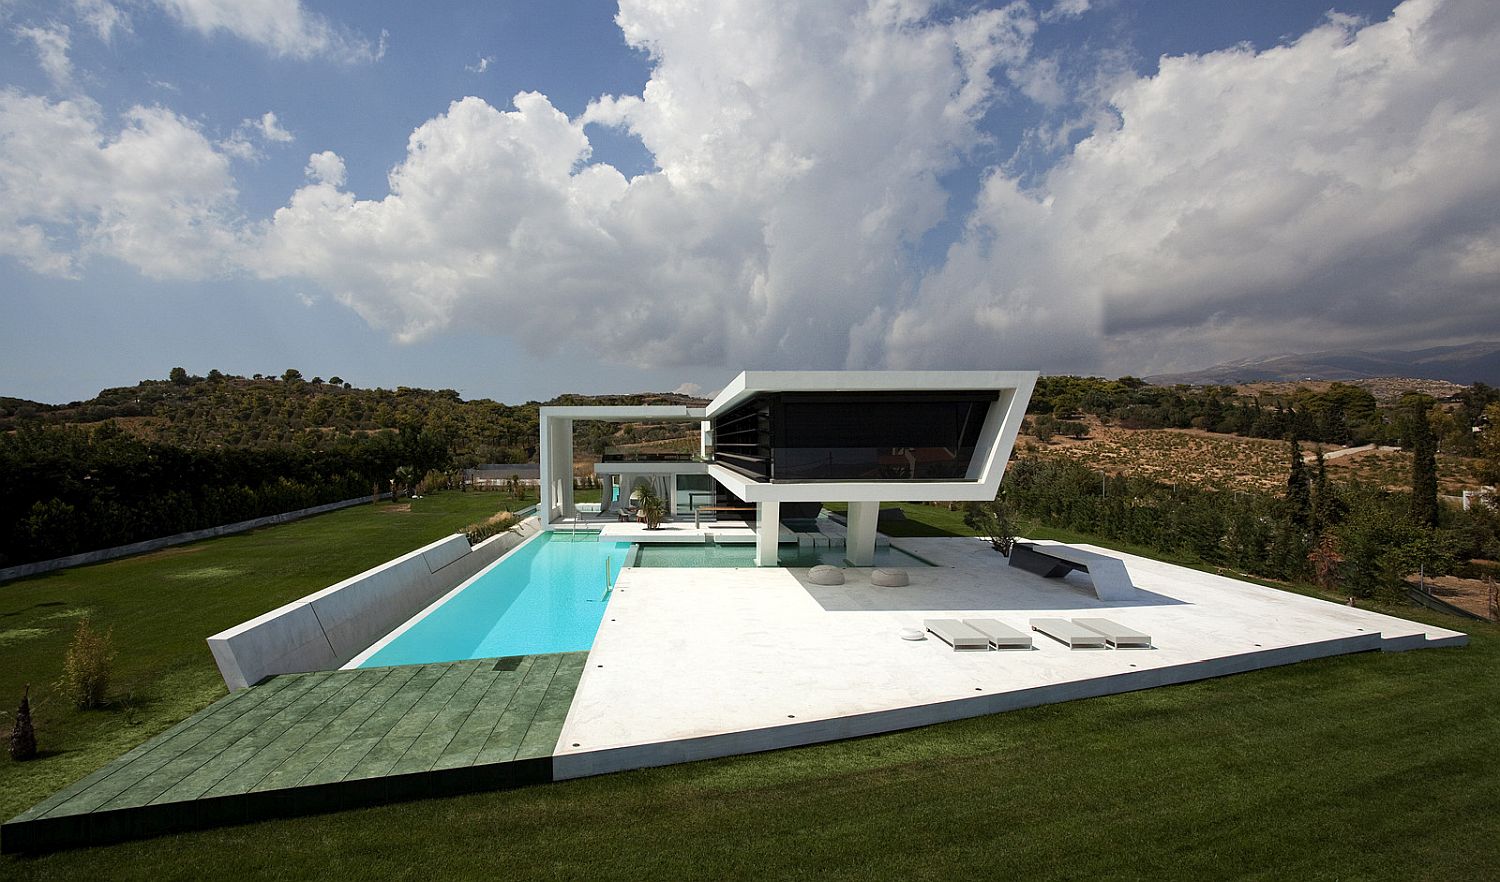 Sailing plays a big role in the overall design of this gorgeous modern house